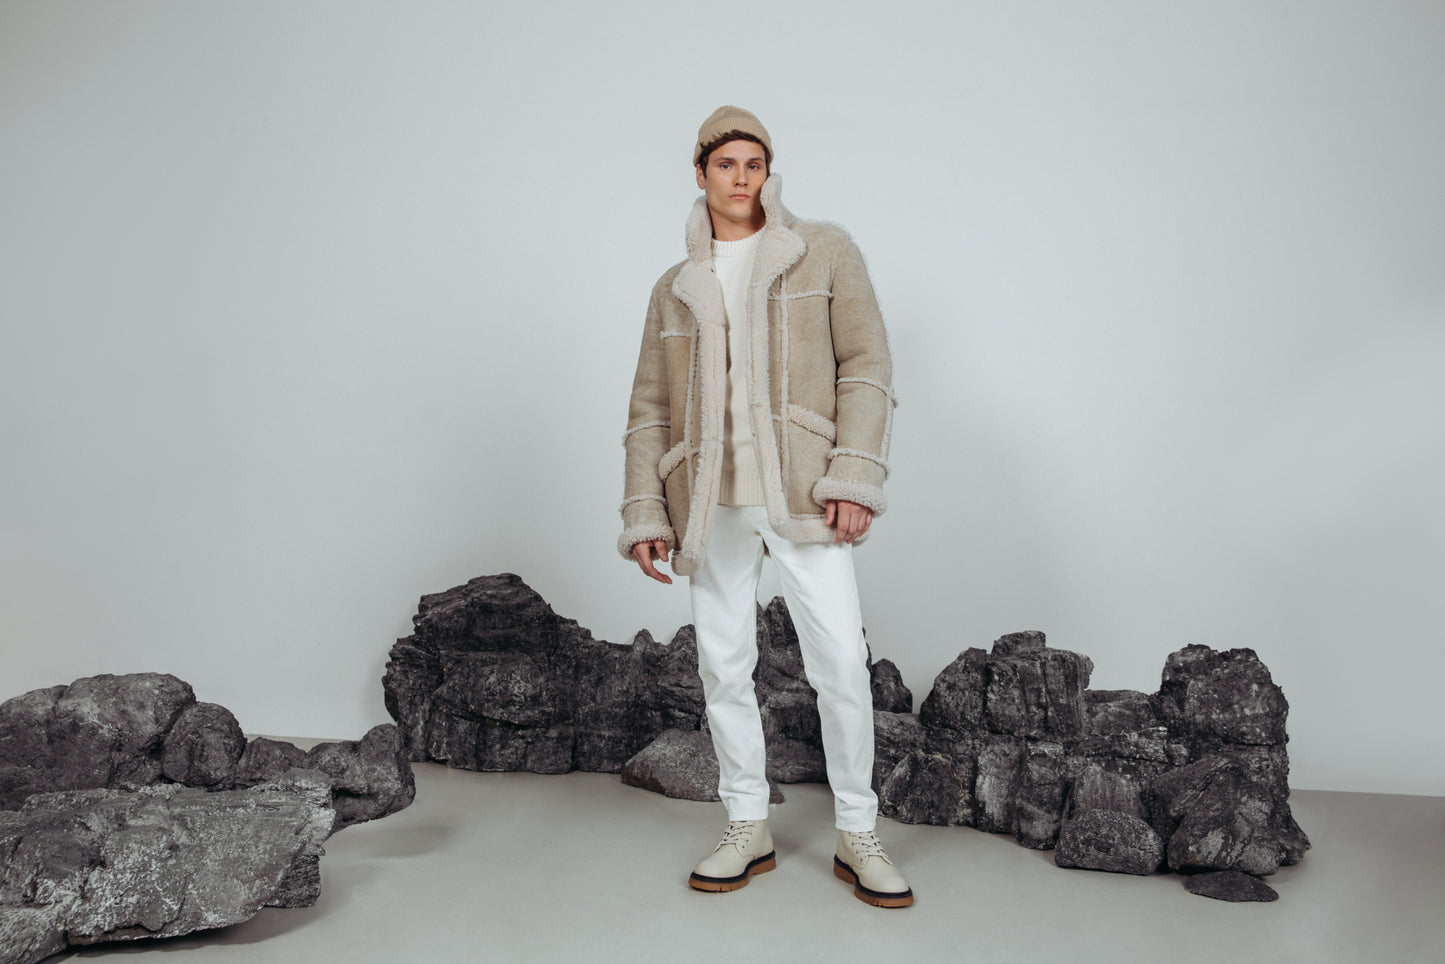 Cement Colour. Shearling. Fits true to size, Reversible. Comfortable fit in the shoulders and chest, straight cut through the torso when worn wool in. Looser fit in the shoulders, chest and torso when worn wool out. , Reversible, Notch lapel, Interior zipper pockets, 31 in